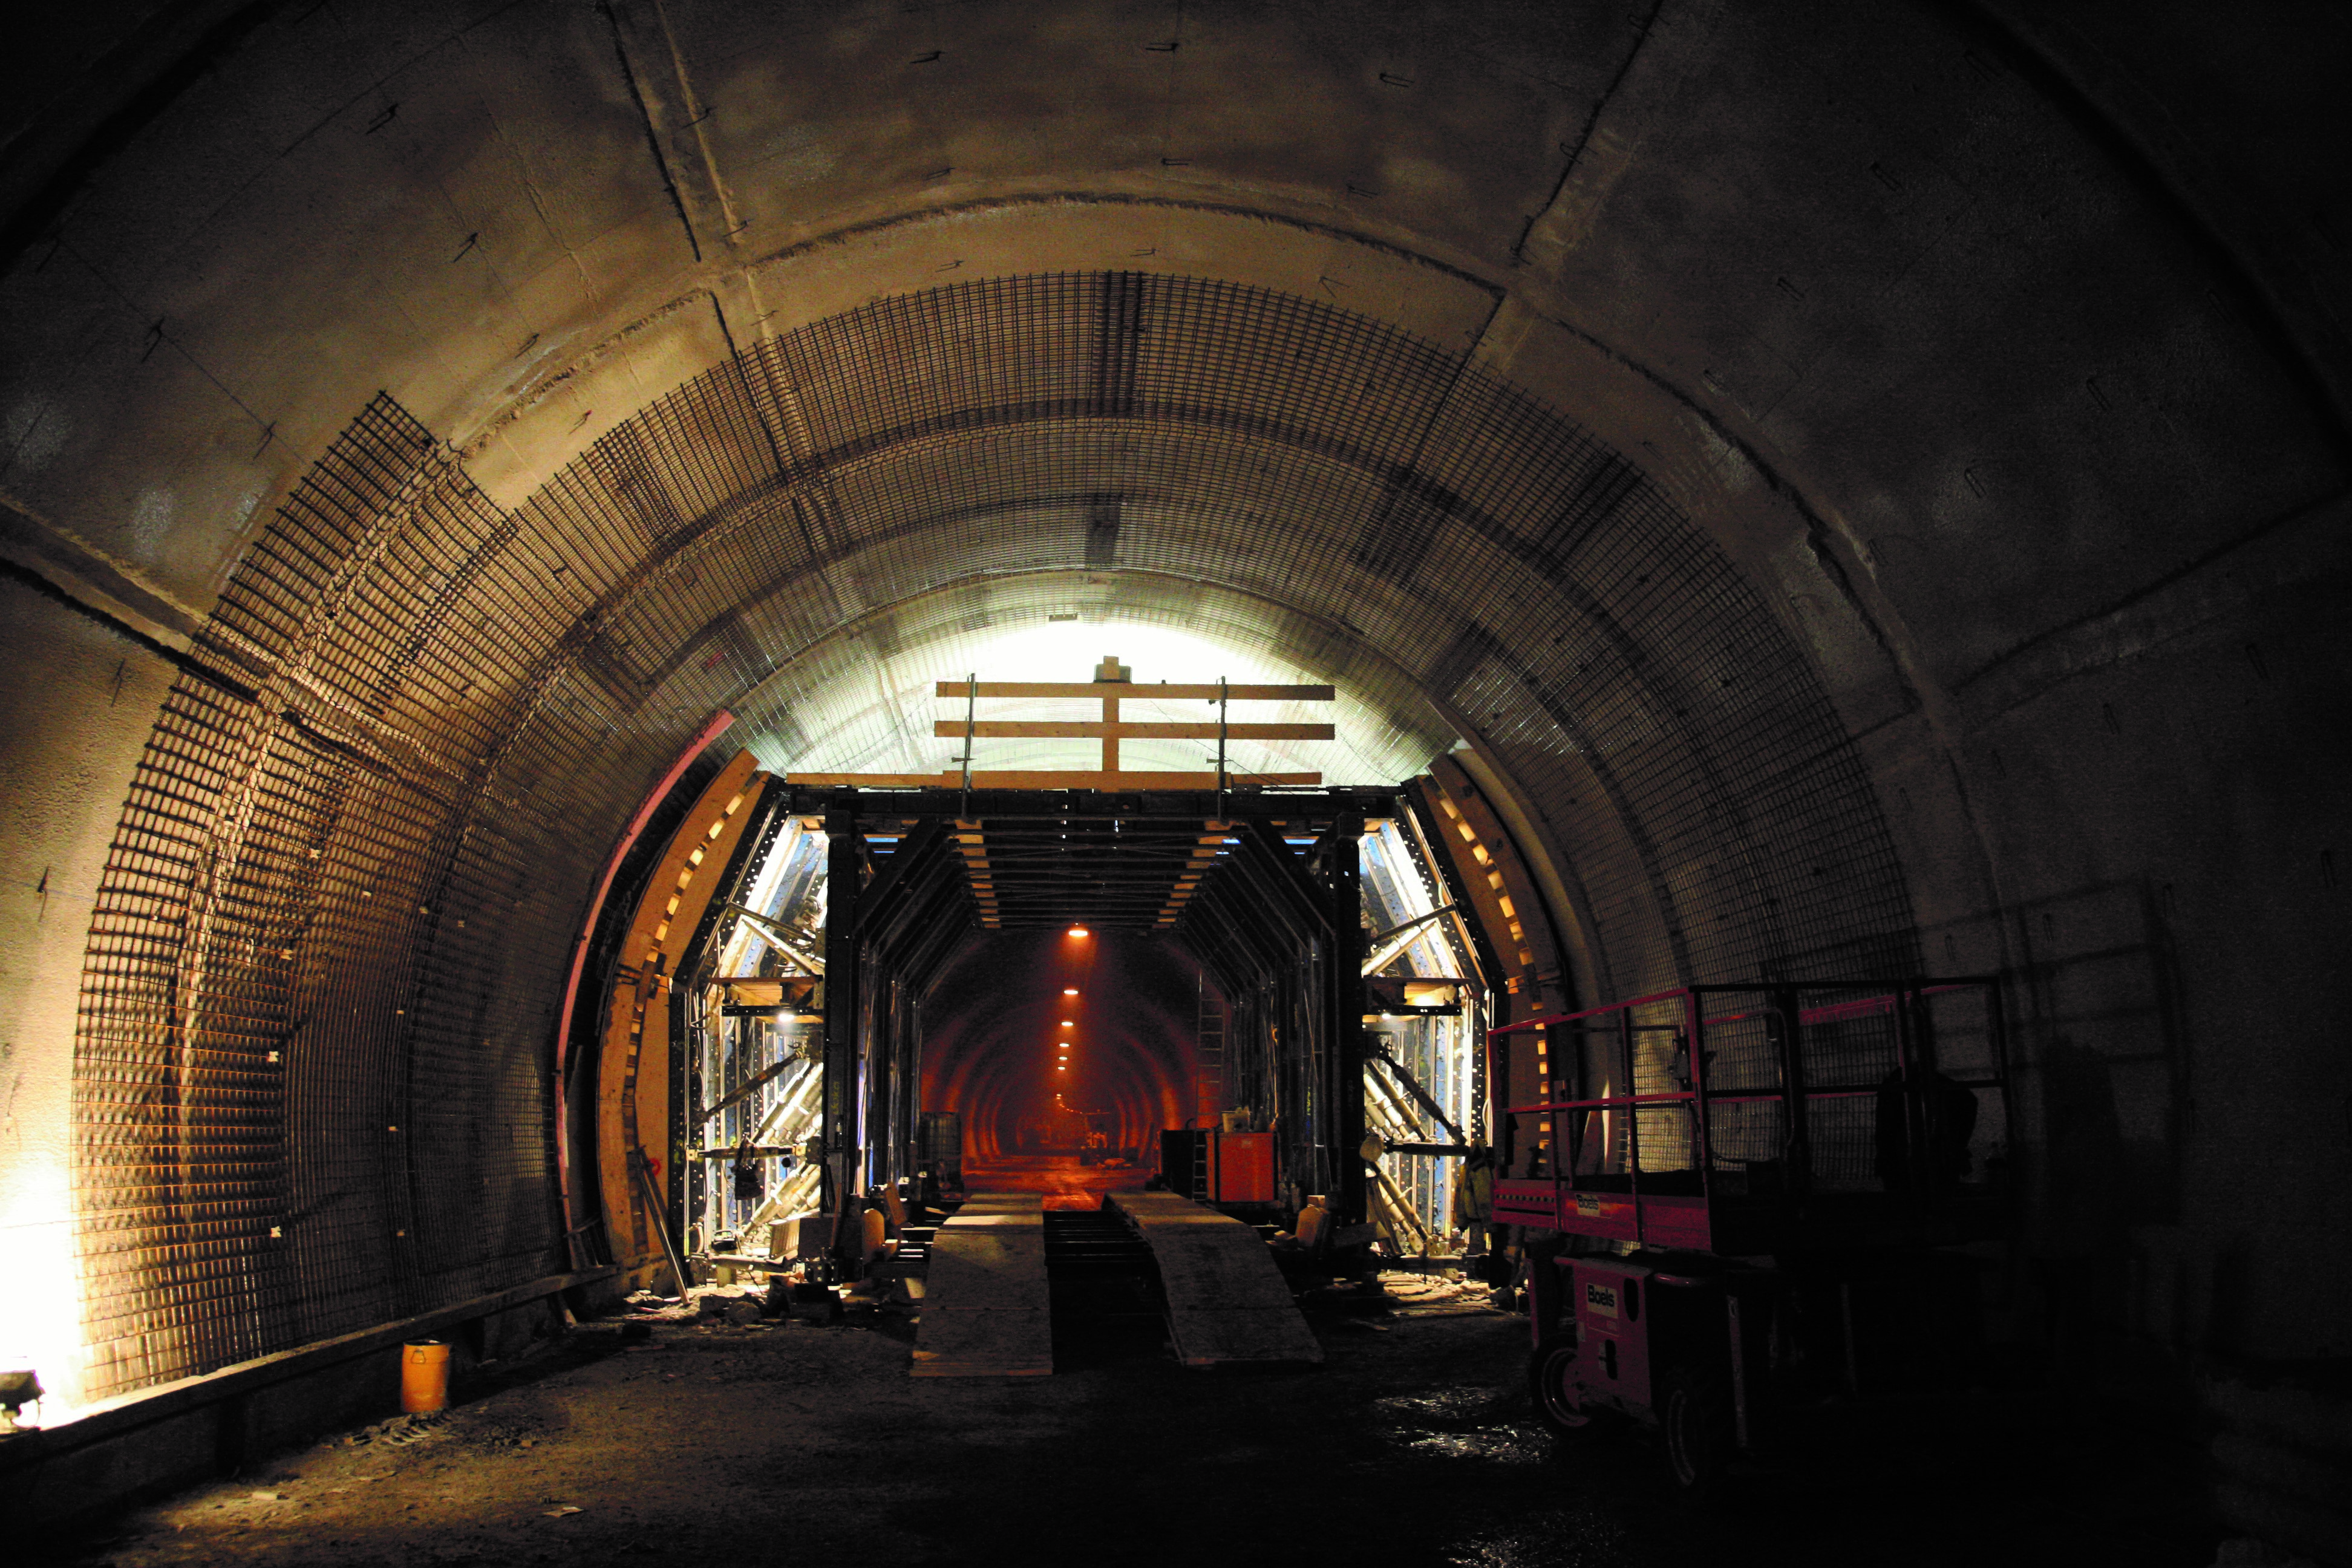 Refurbishment of the Selzthaltunnel with MasterSeal 345 (test2)